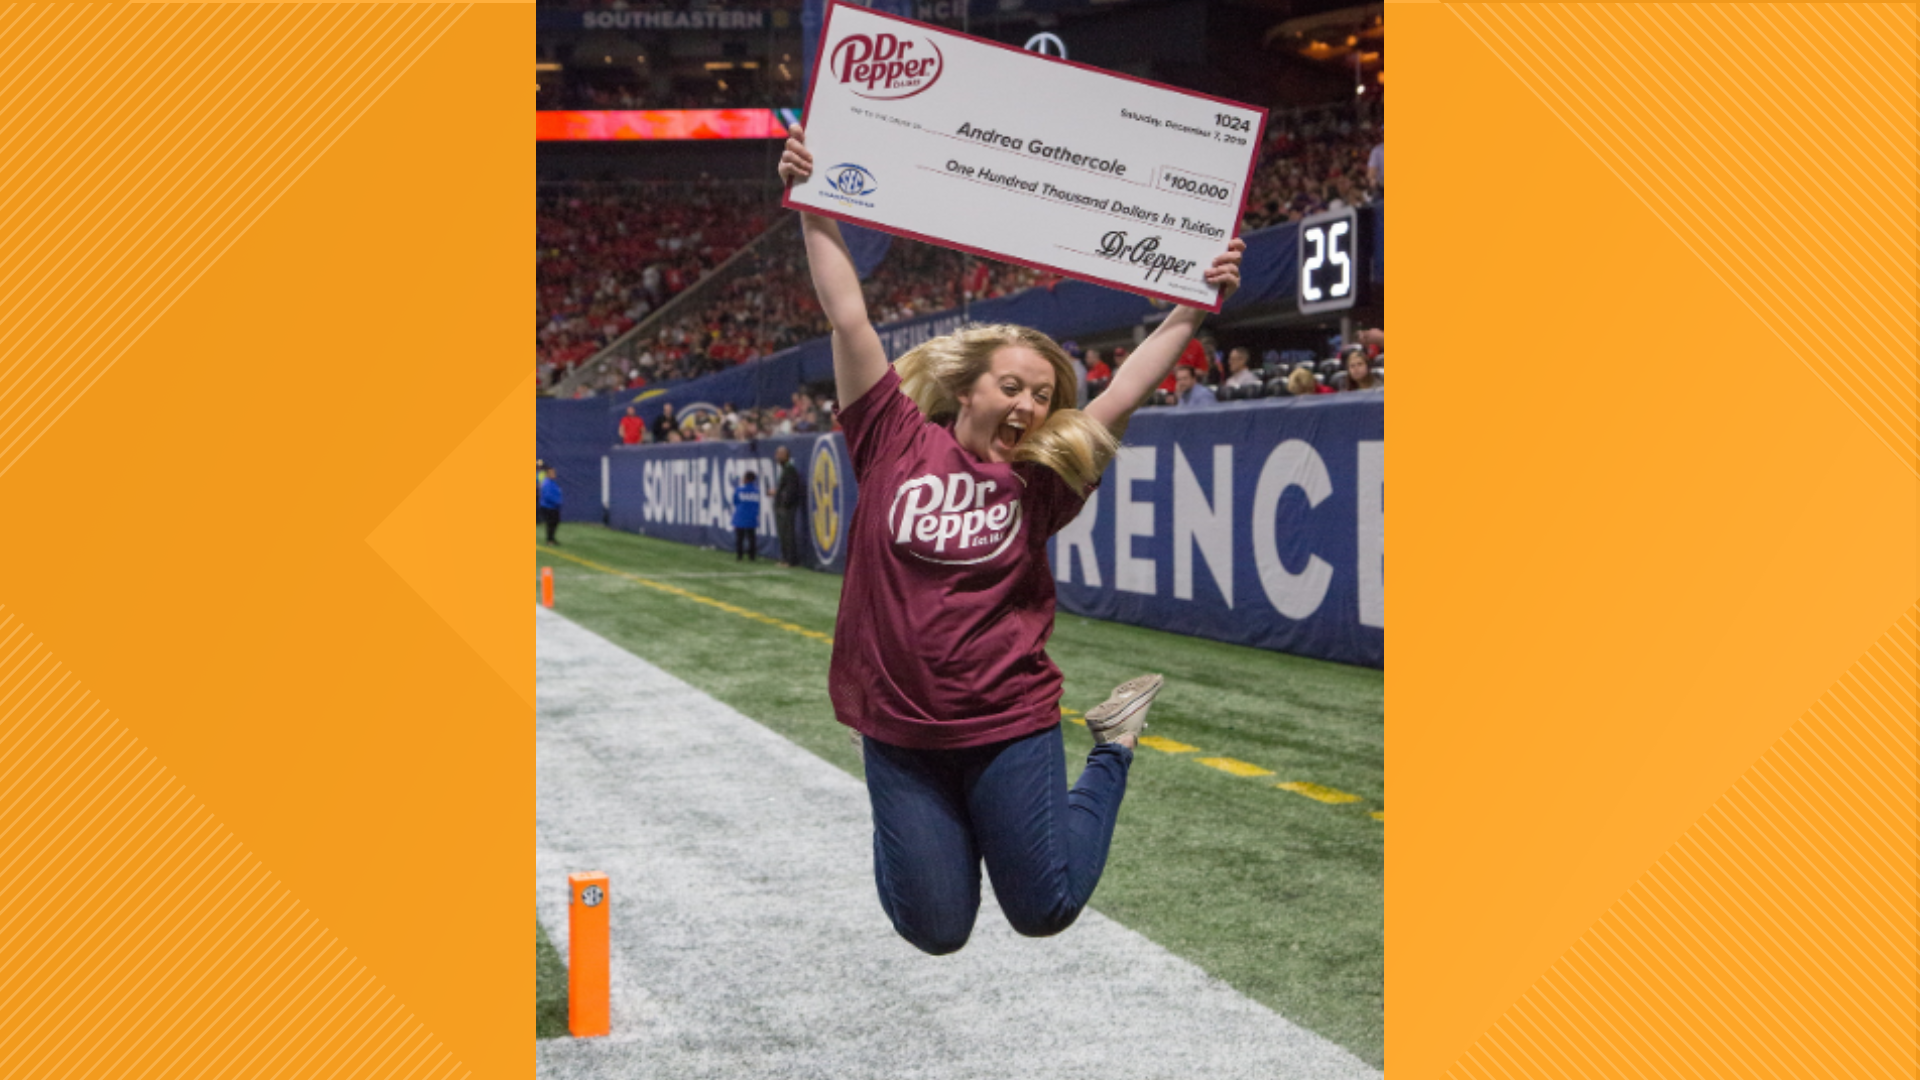 Biochemistry student Andrea Gathercole won the $100,000 during halftime at the SEC conference championship game on Dec. 7.